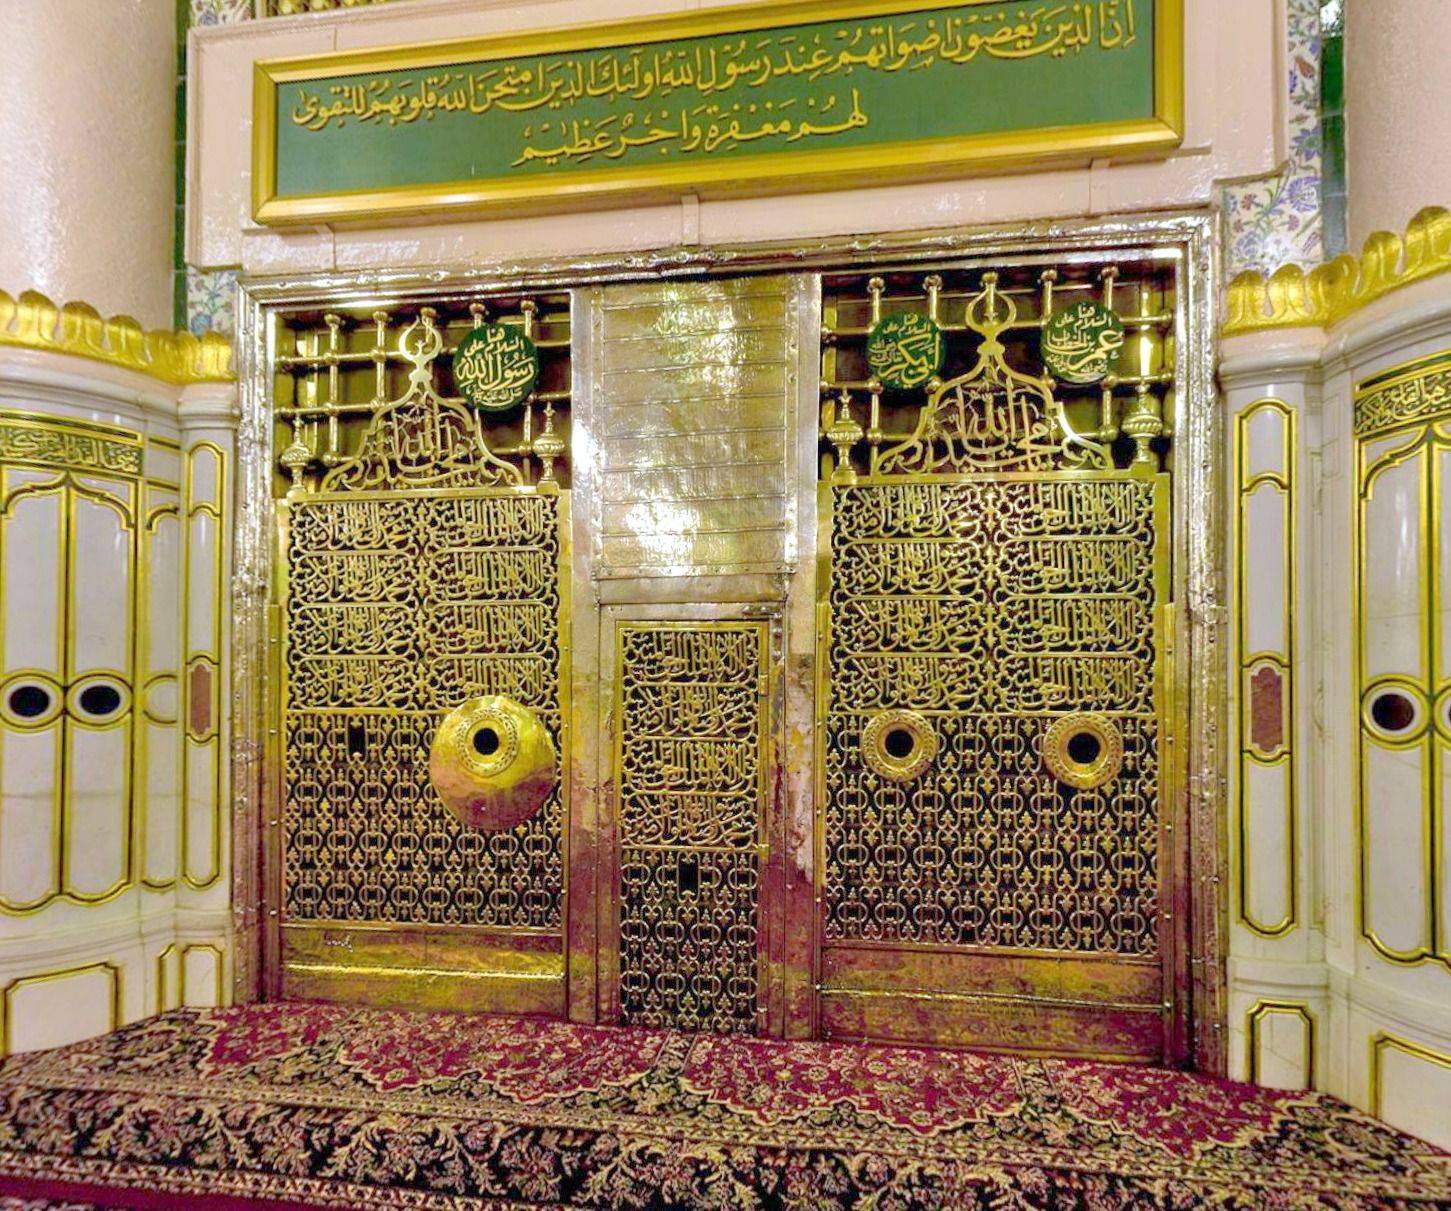 Roza of Prophet Muhammad PBUH To Reopen From 1st Rabi ul Awwal